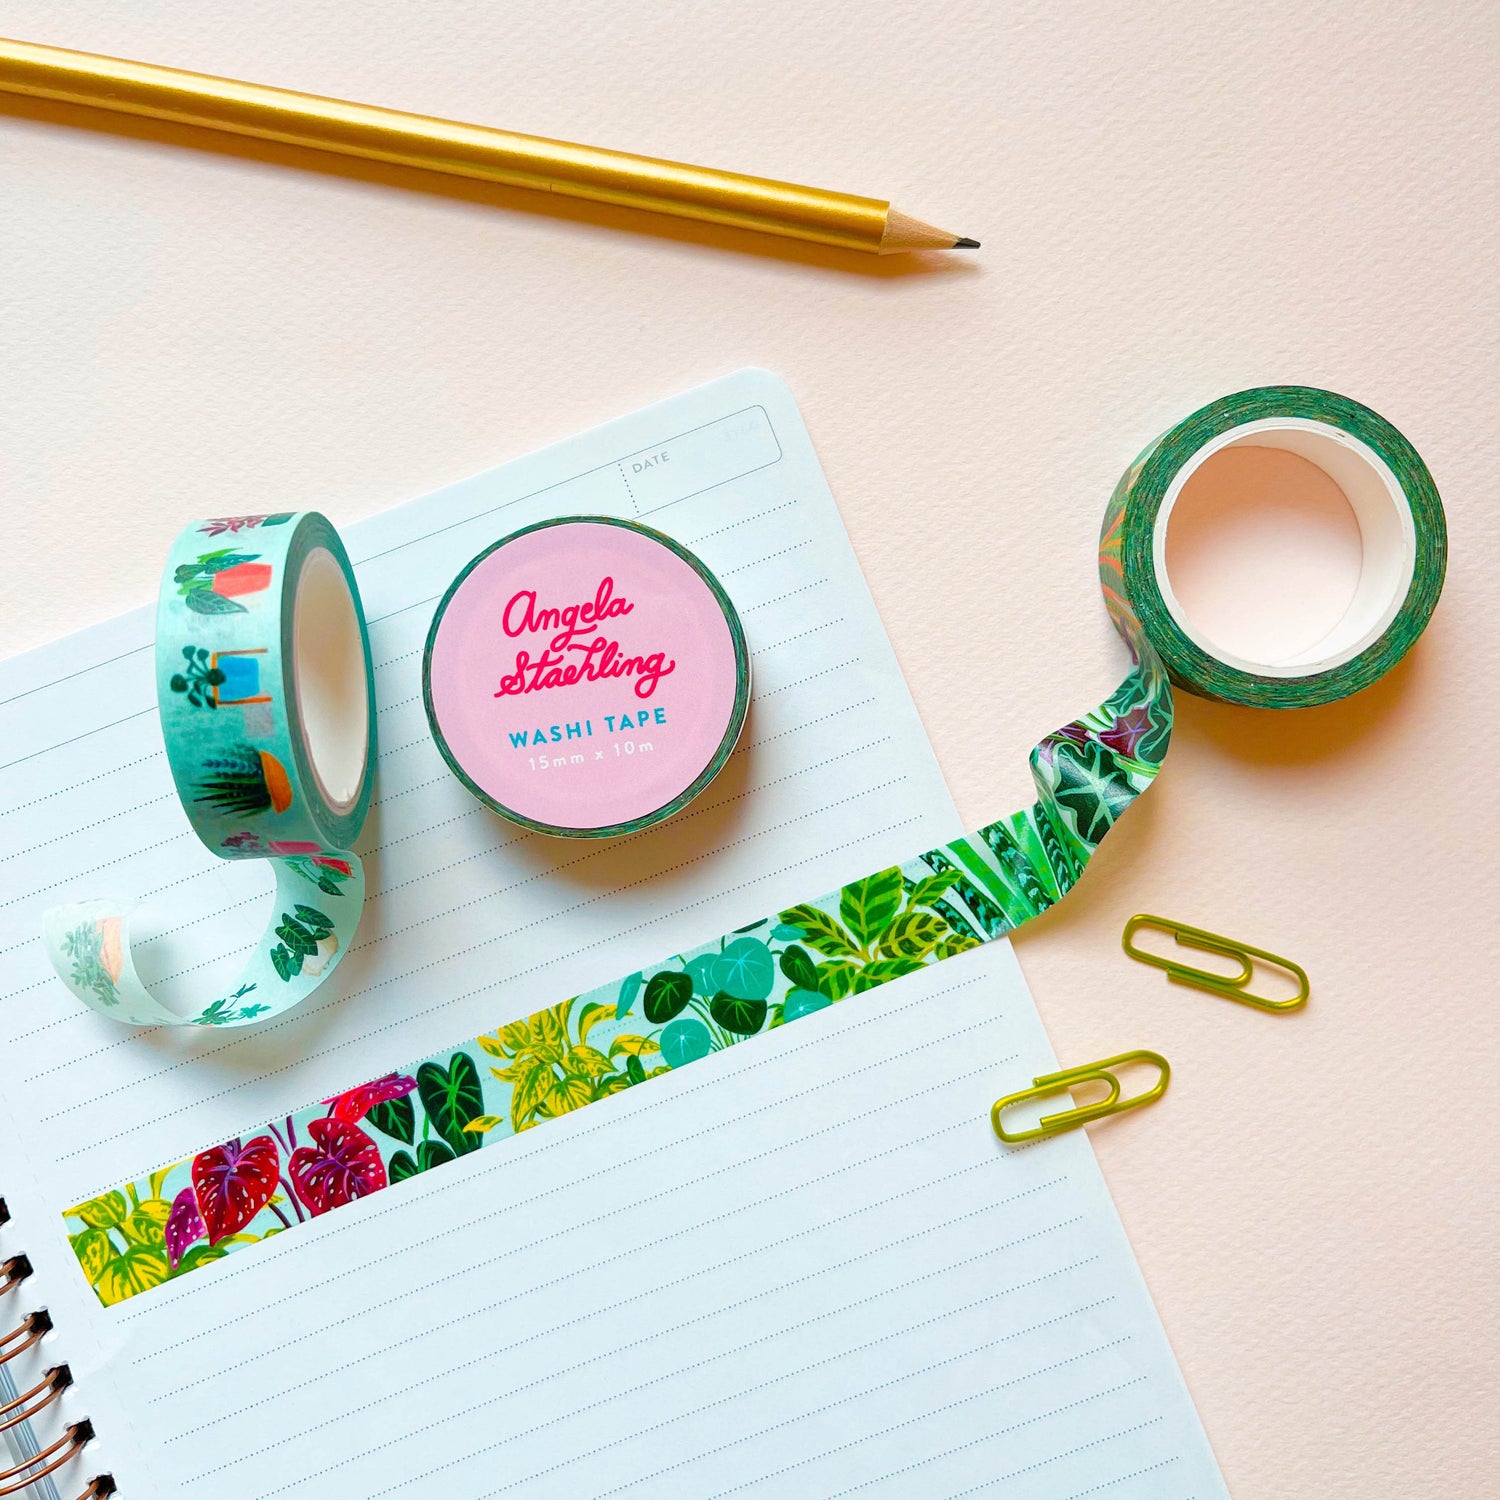 Plant washi tape with houseplant washi tape, paper clips, notebook, and pencil